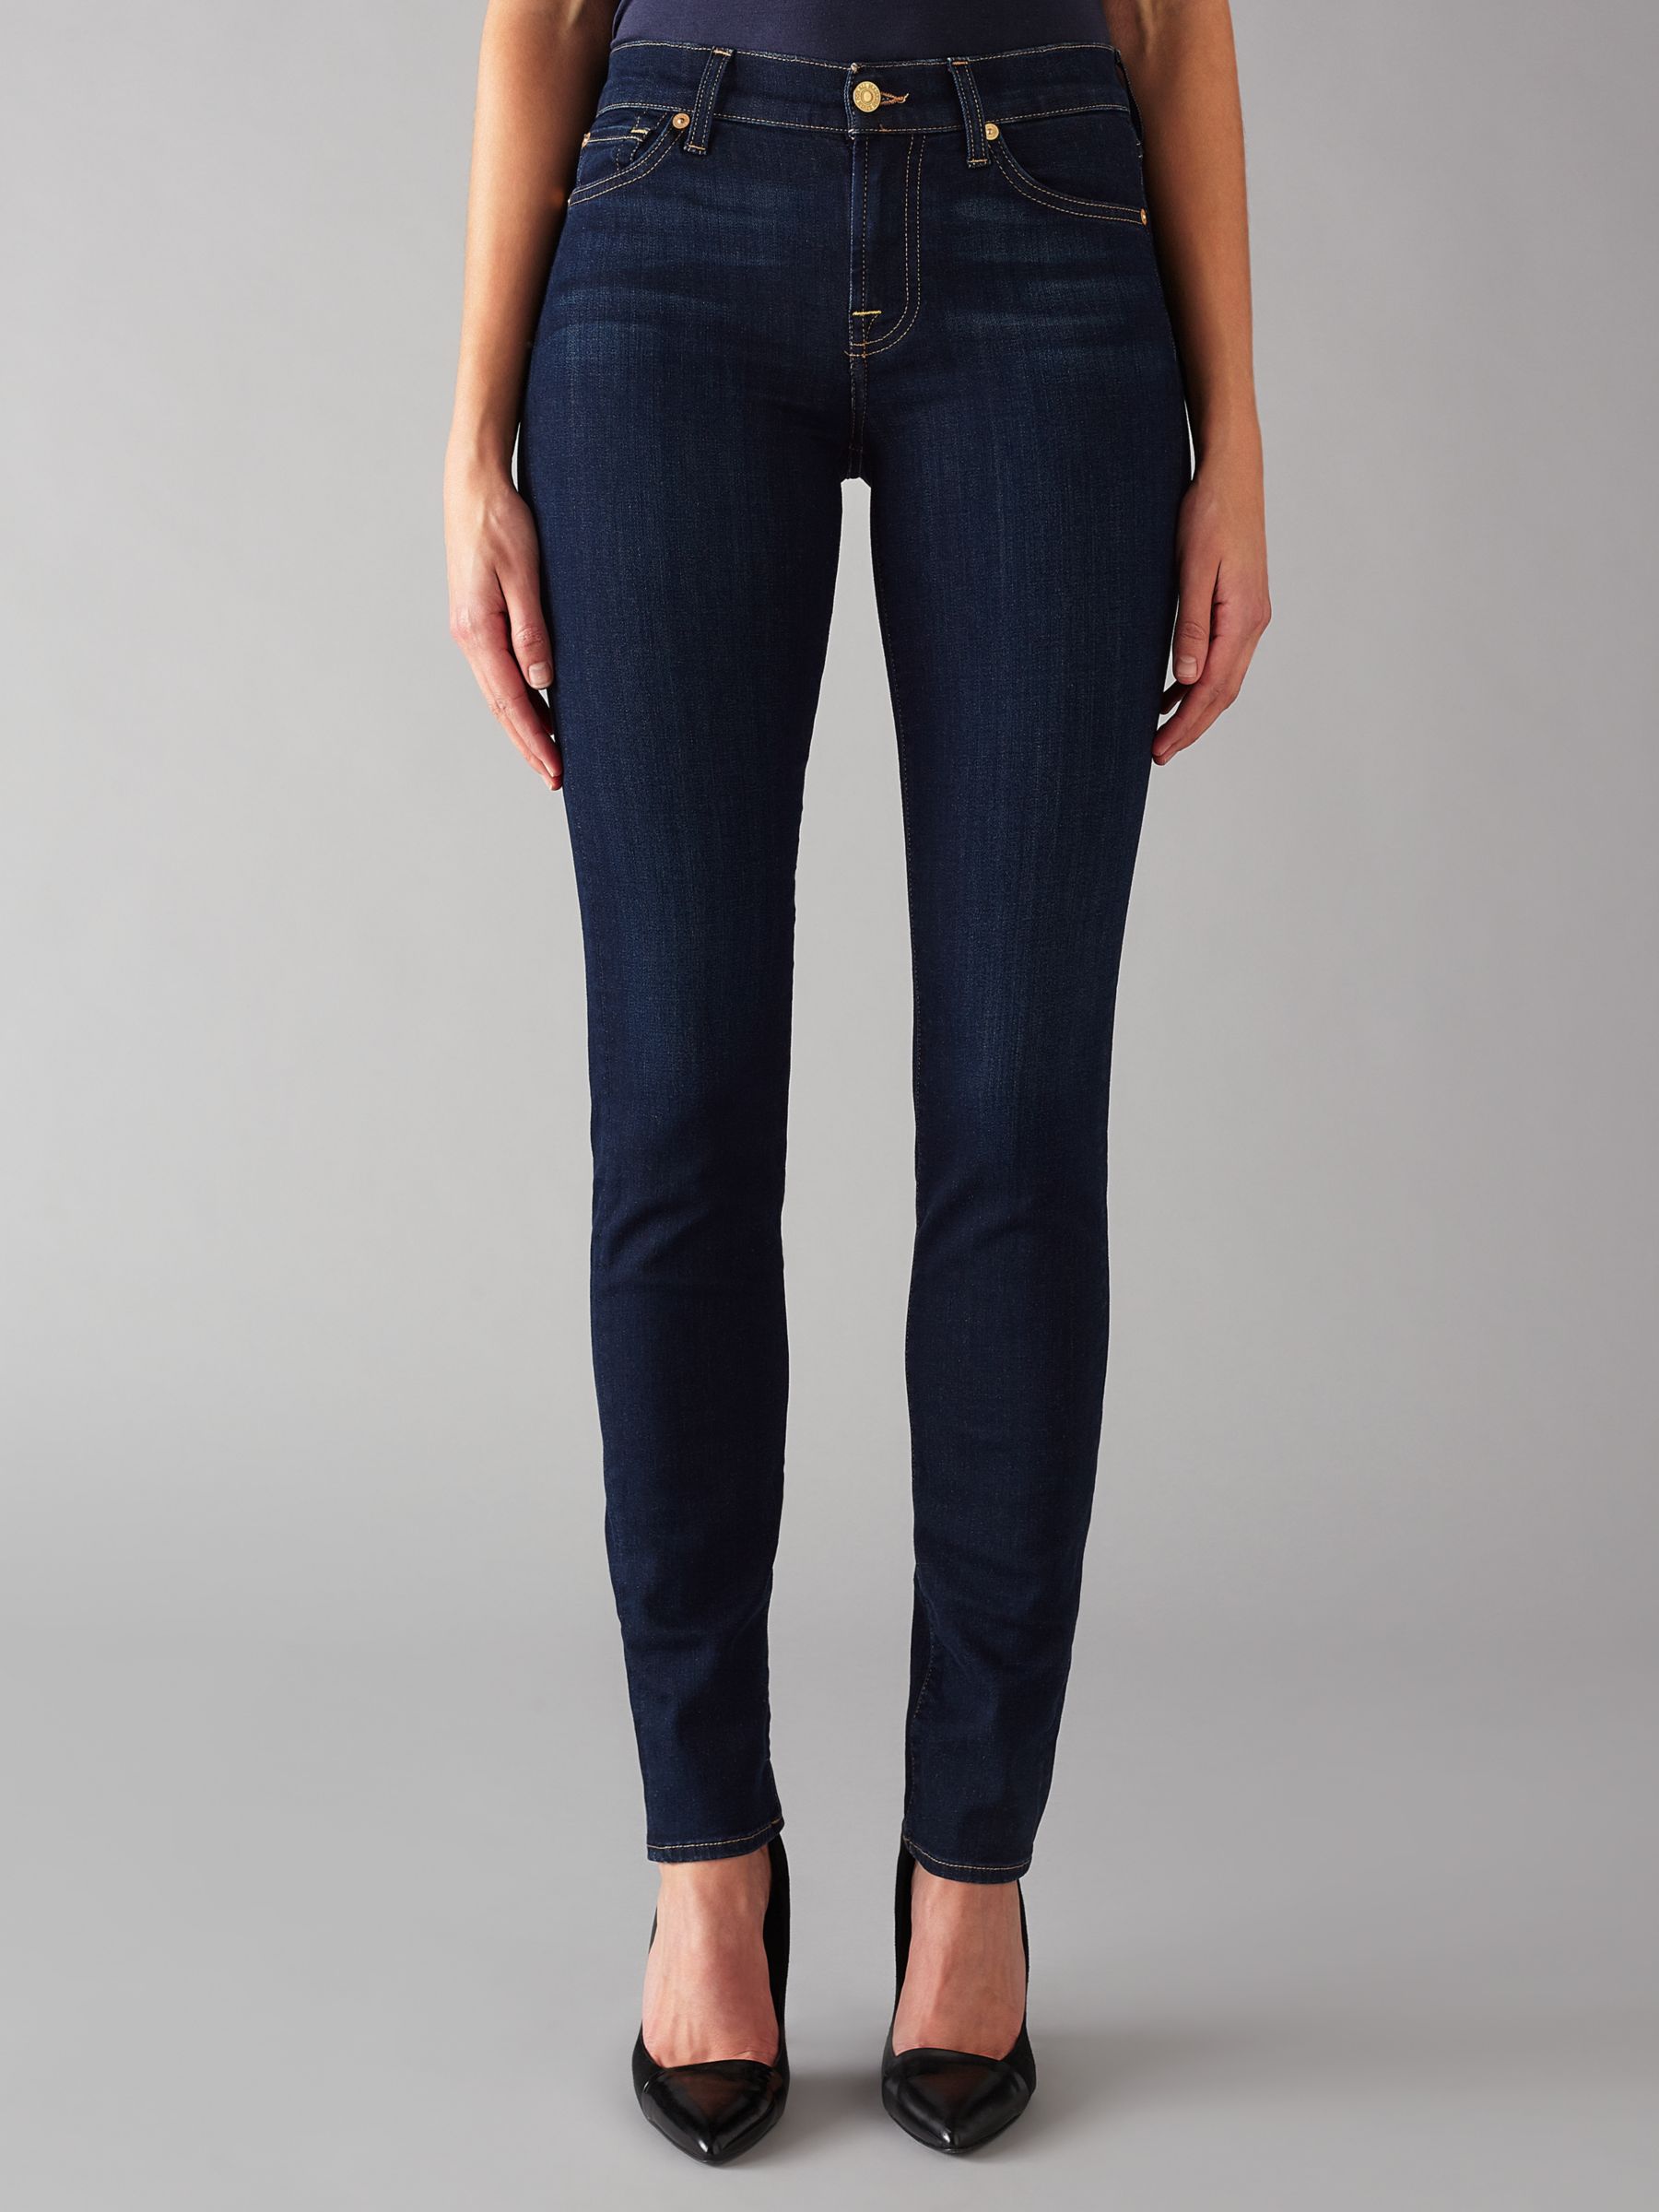 7 for all mankind roxanne skinny jeans